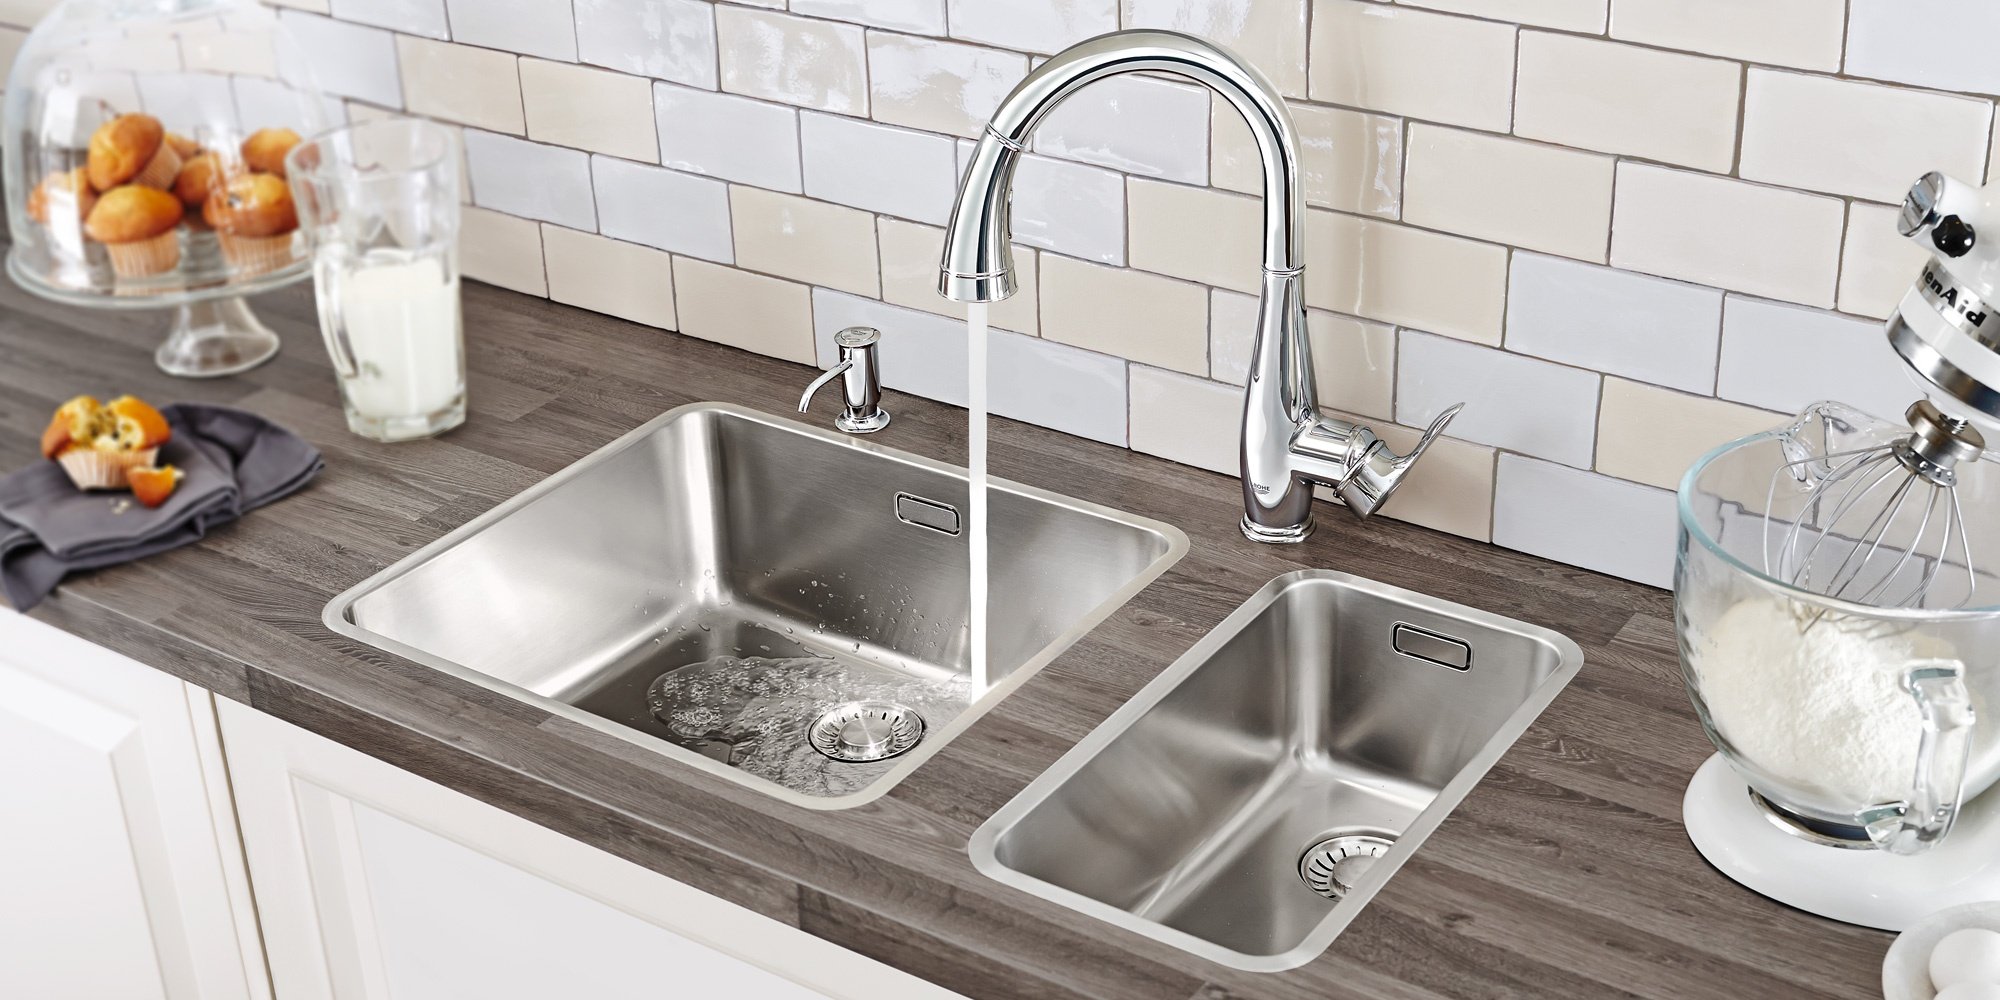 25 Types of Kitchen Sinks to Consider for Your Home